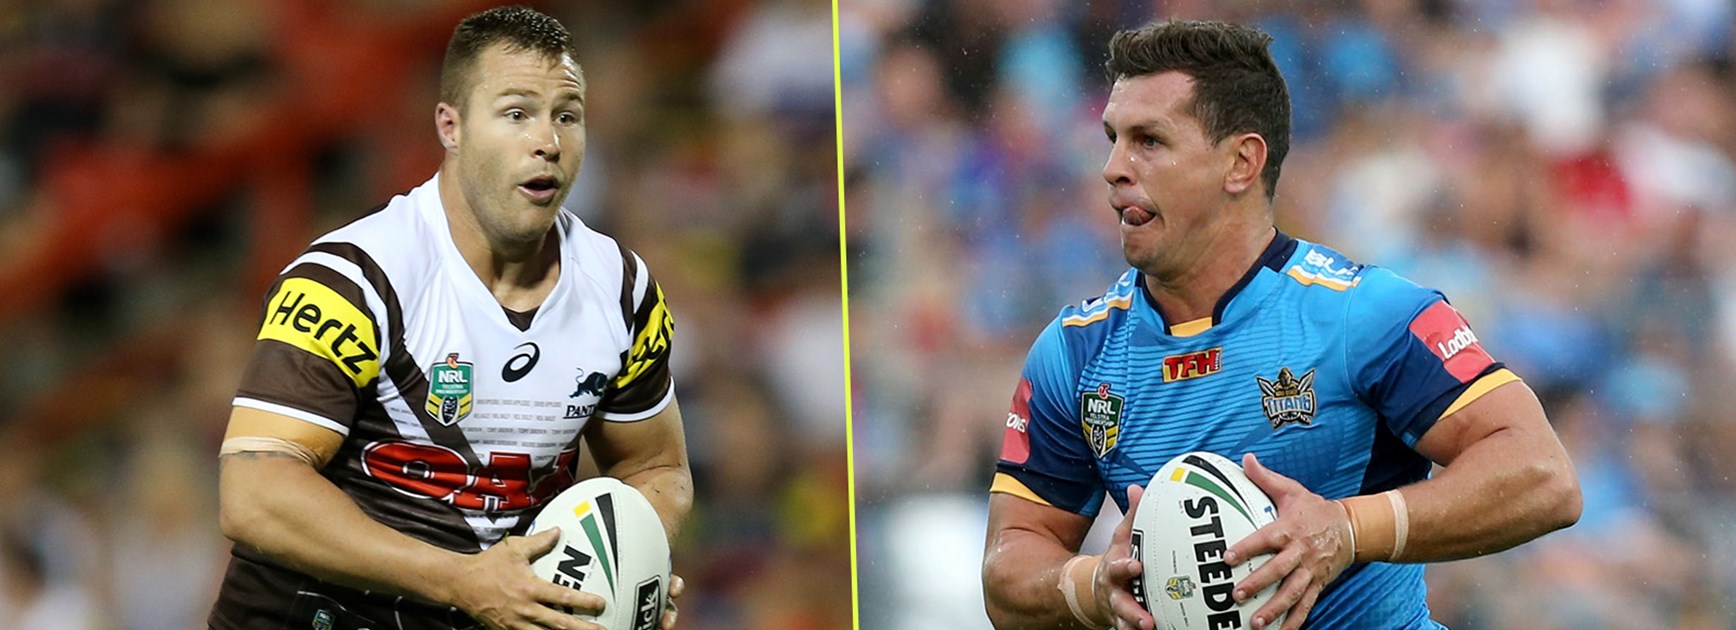 They are likely to be State of Origin teammates, but that won't matter when Trent Merrin and Greg Bird clash on Sunday.